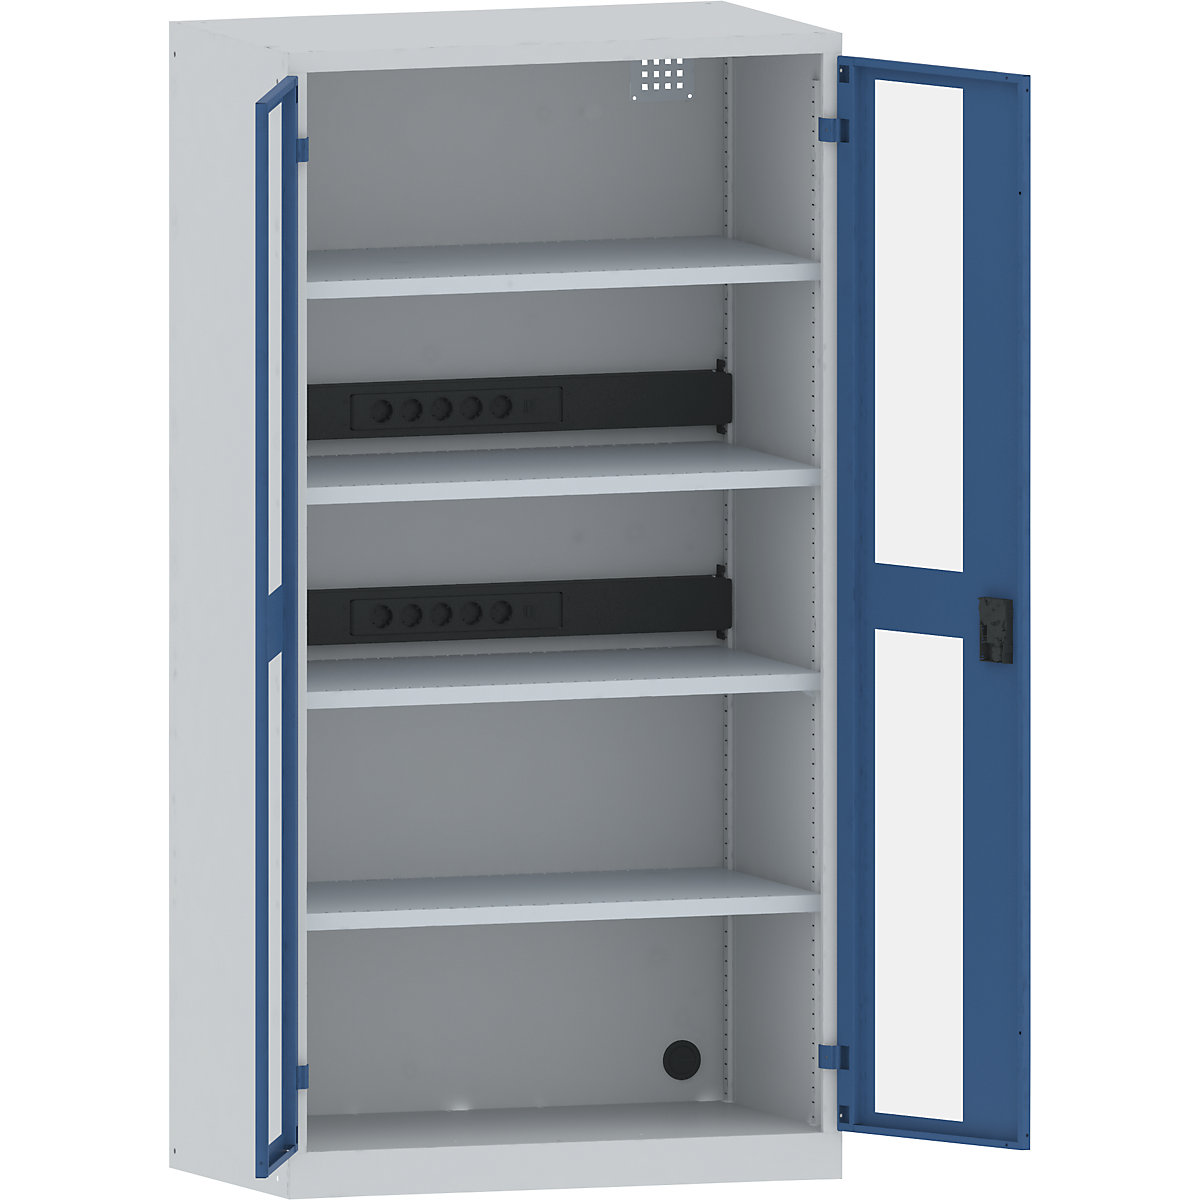 Battery charging cabinet – LISTA, 4 shelves, vision panel doors, 2 power strips at rear, grey / blue-16